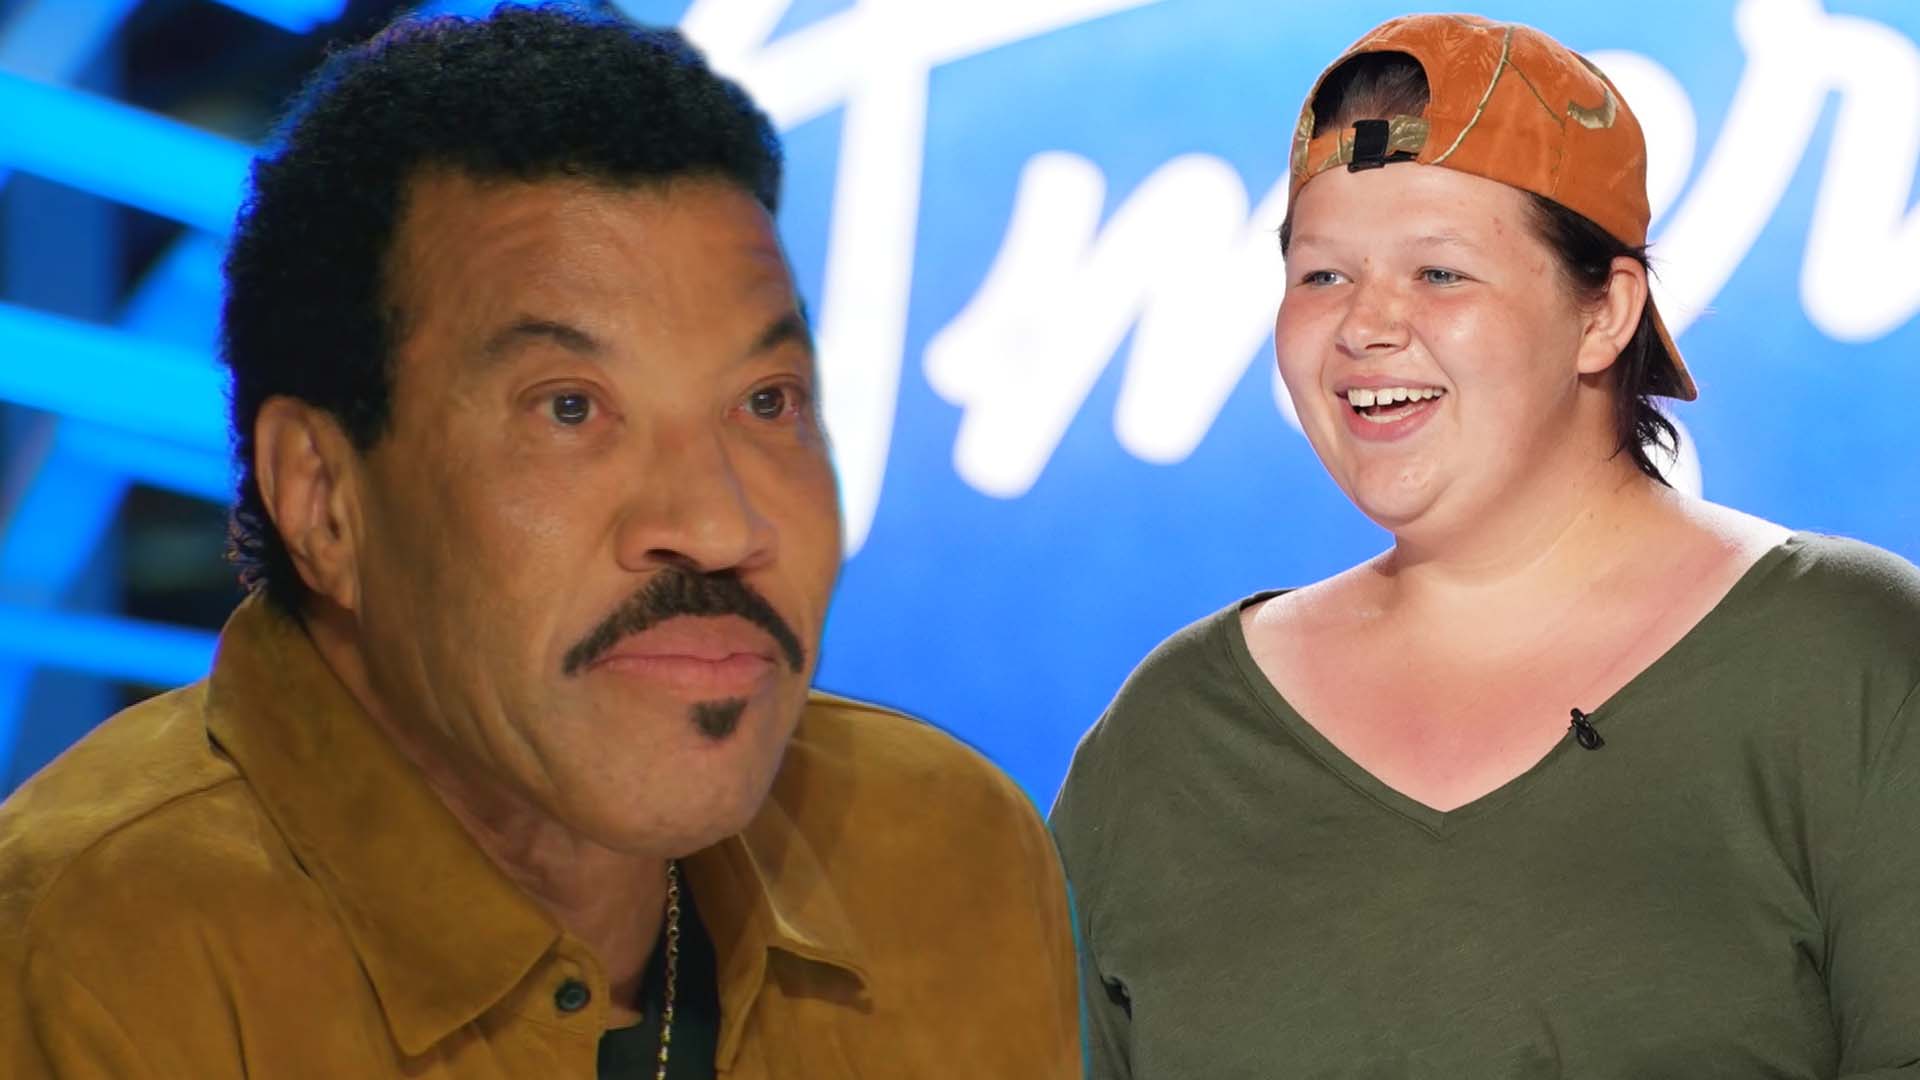 'American Idol' Singer Brings Lionel Richie to Tears in Her First Performance